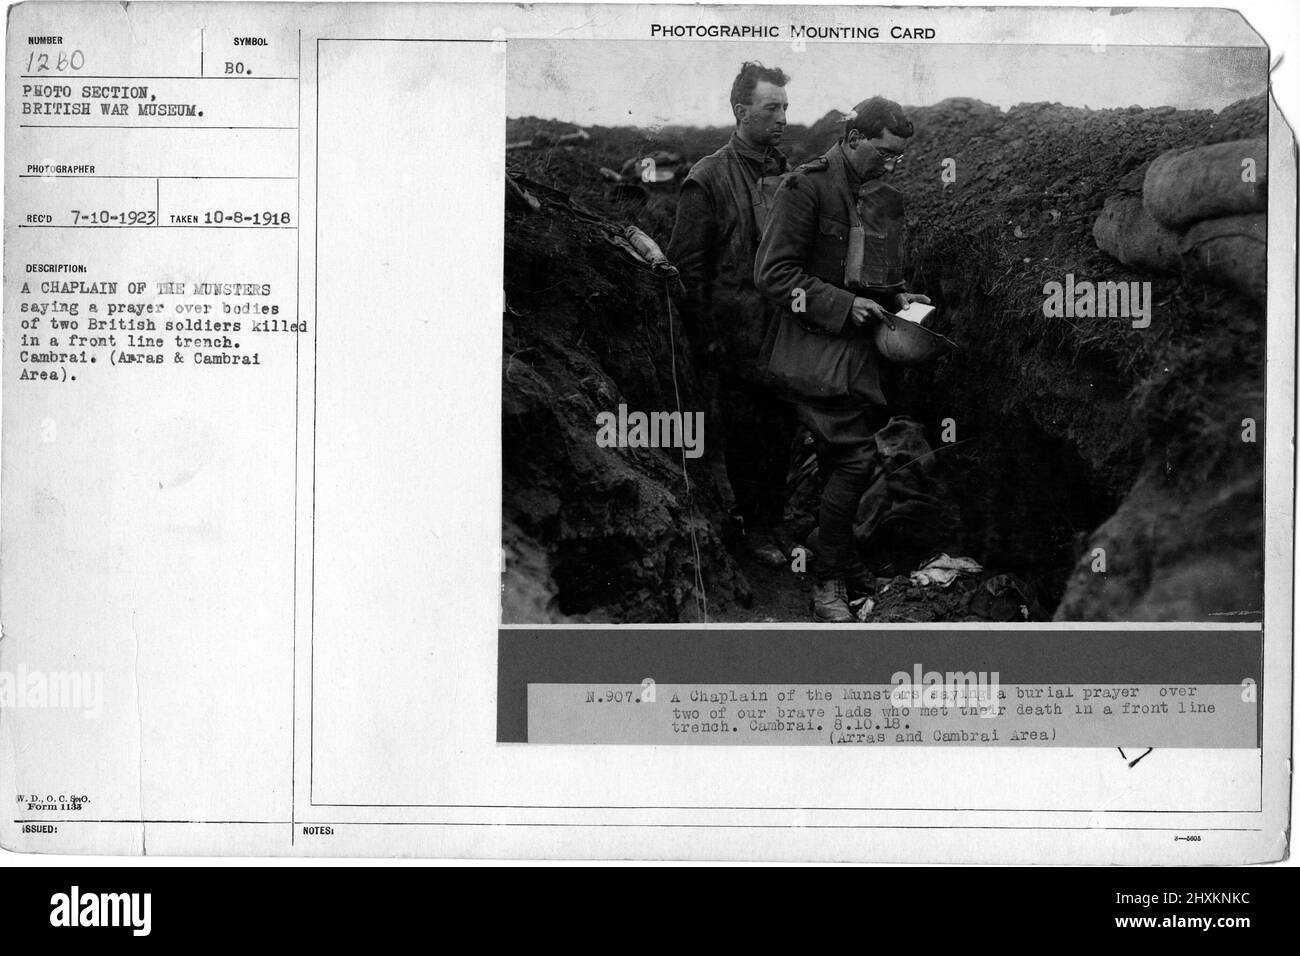 A Chaplain of the Munsters saying a prayer over bodies of two  British soldiers killed in a front line trench. Cambrai. (Arras & Cambrai Area). Collection of World War I Photographs, 1914-1918 that depict the military activities of British and other nation's armed forces and personnel during World War I. Stock Photo